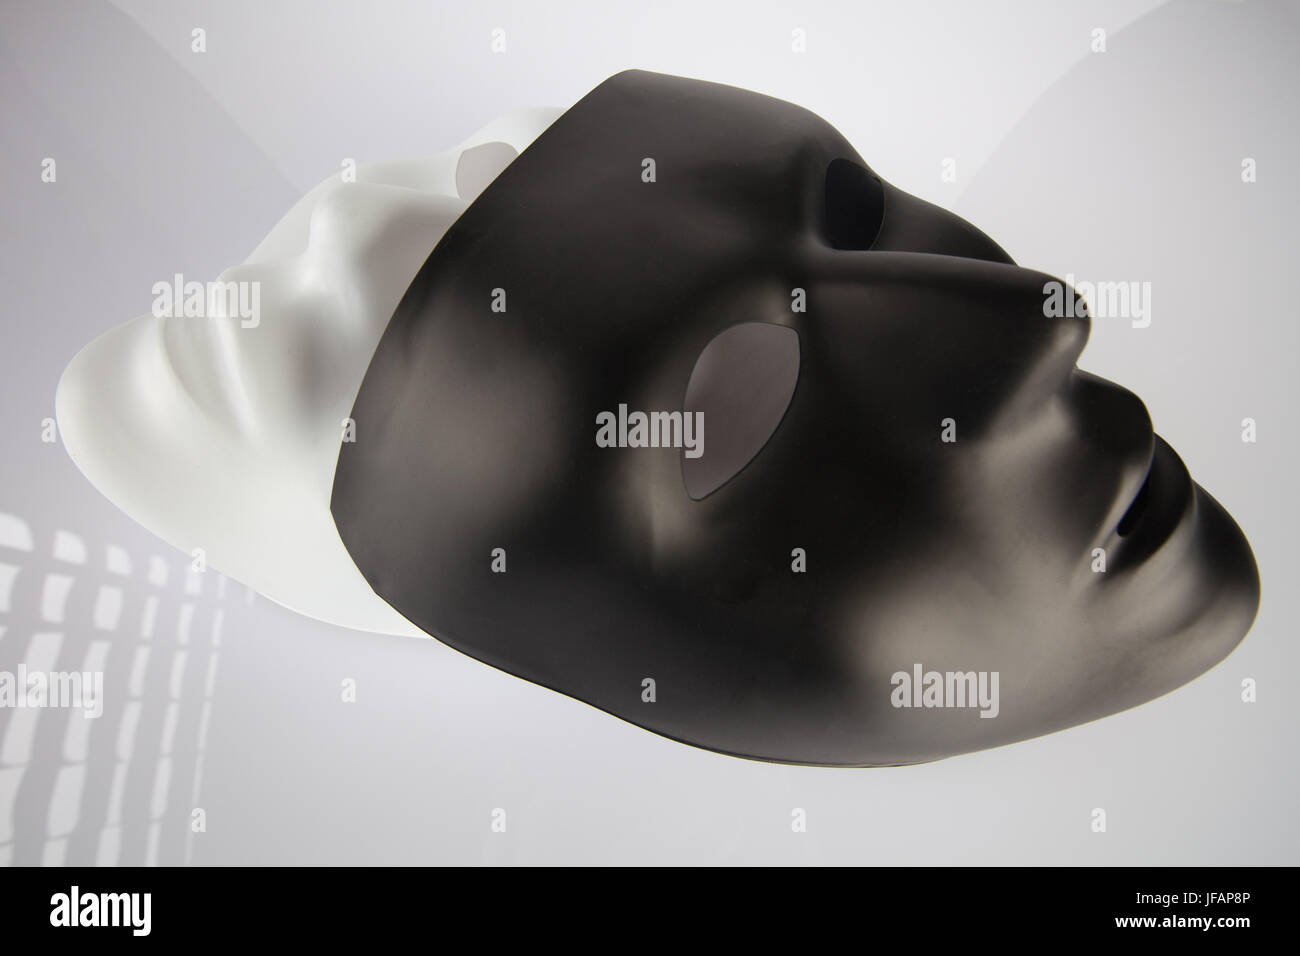 Black and white masks stacked on top of each other on white reflective surface. Identity and race concept Stock Photo